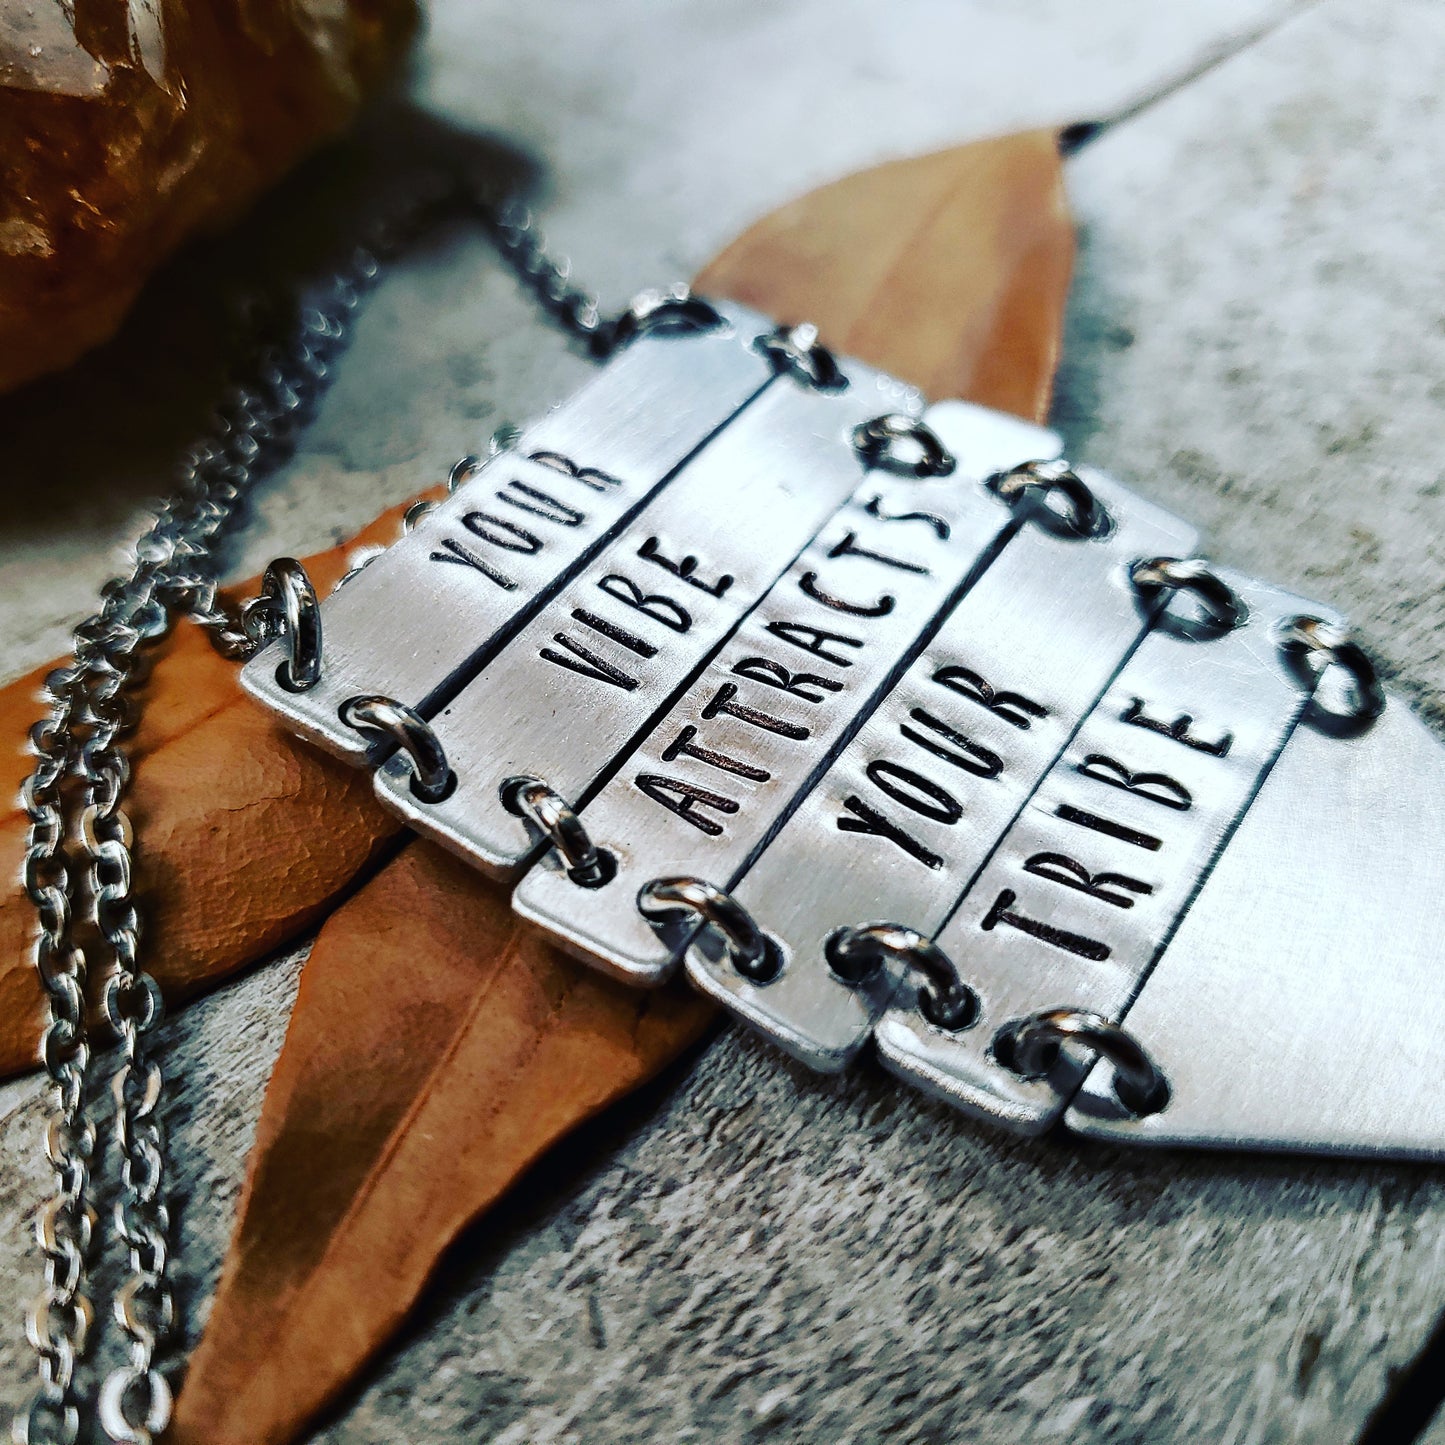 Your vibe attracts your tribe Cascade necklace